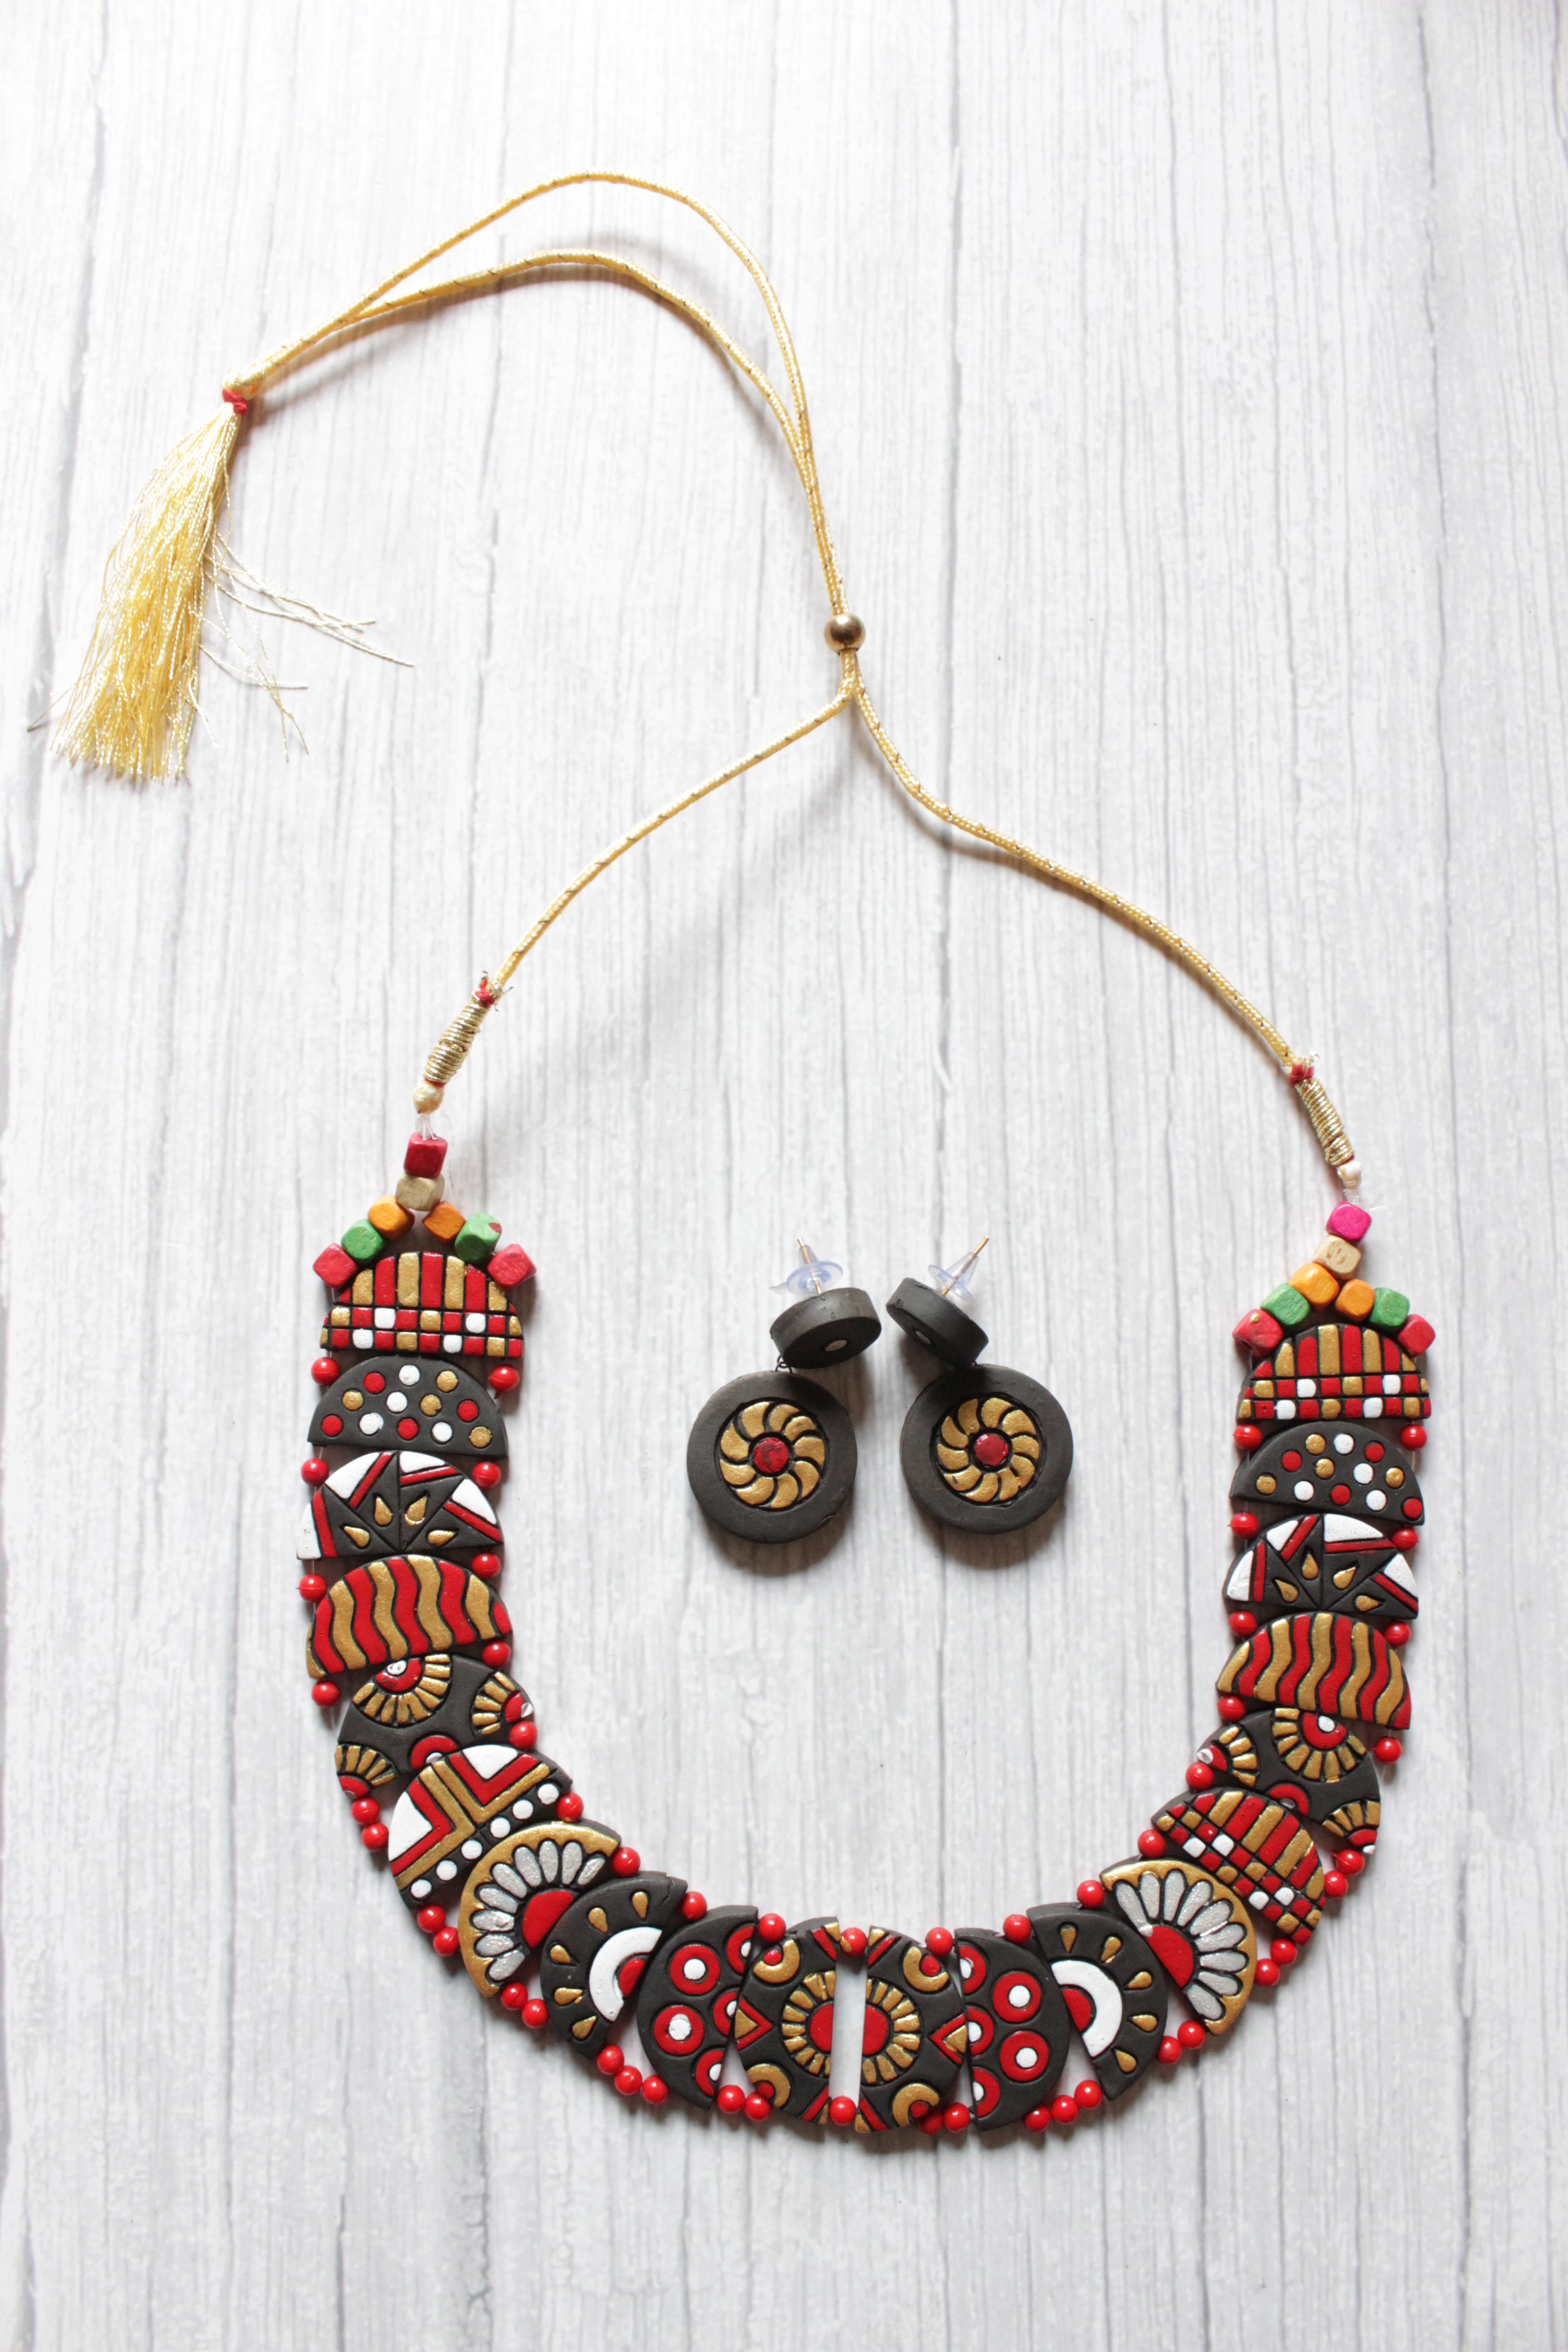 Handcrafted Multi-Color Tribal Motifs Terracotta Clay Adjustable Length Choker Necklace Set